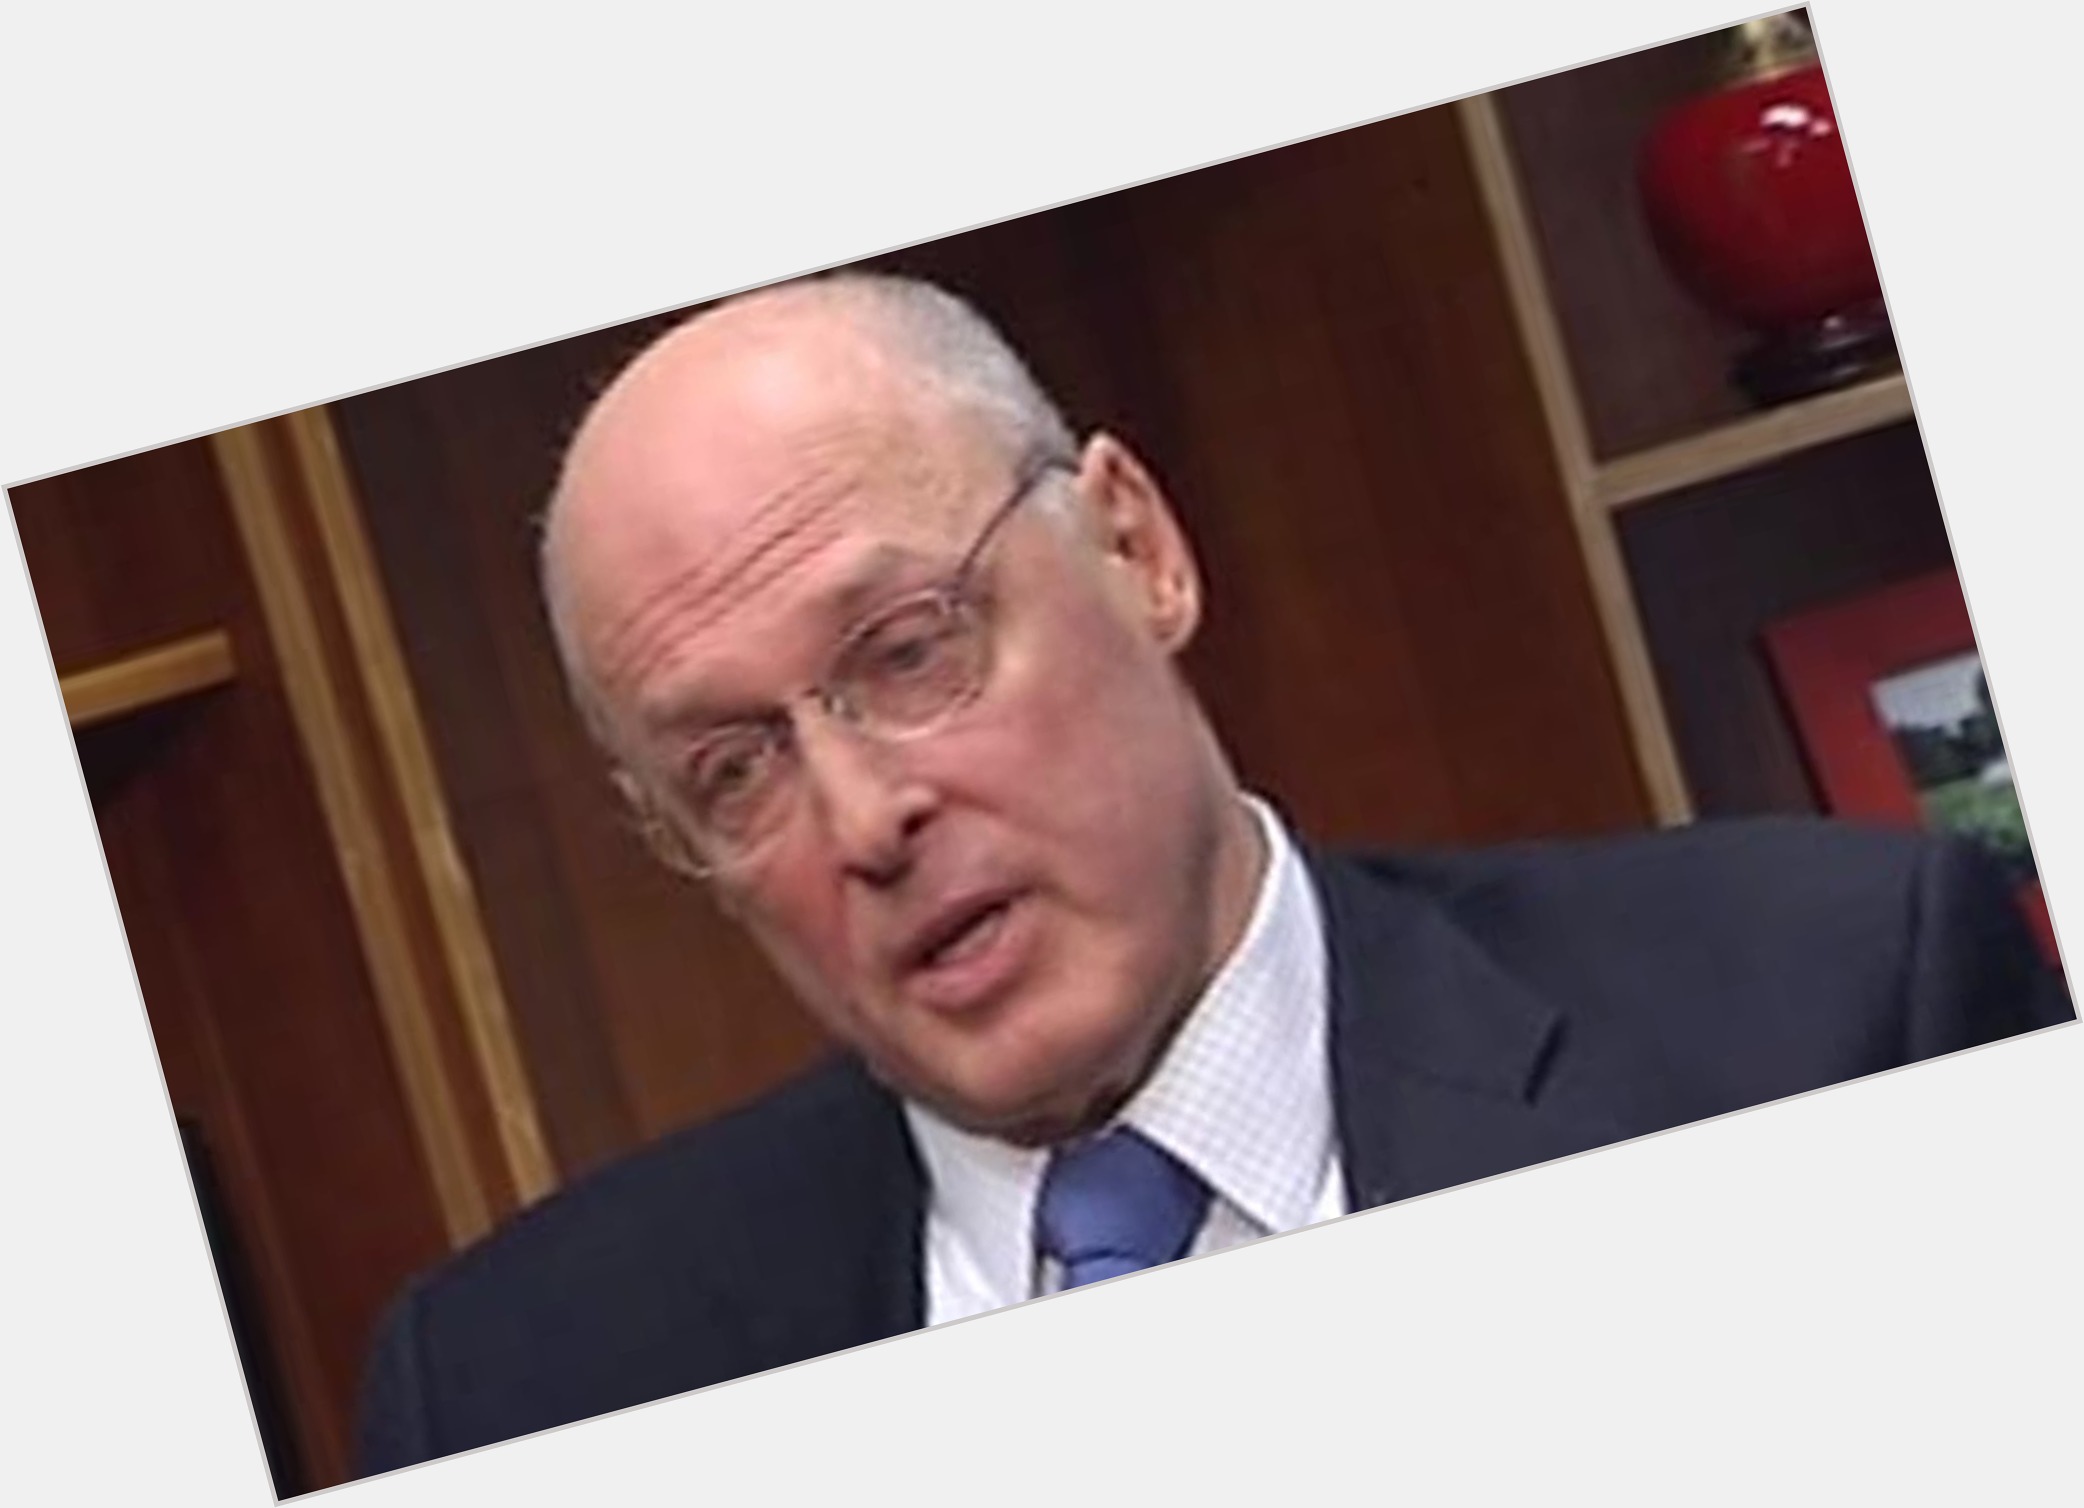 Https://fanpagepress.net/m/H/Henry Paulson Exclusive Hot Pic 3